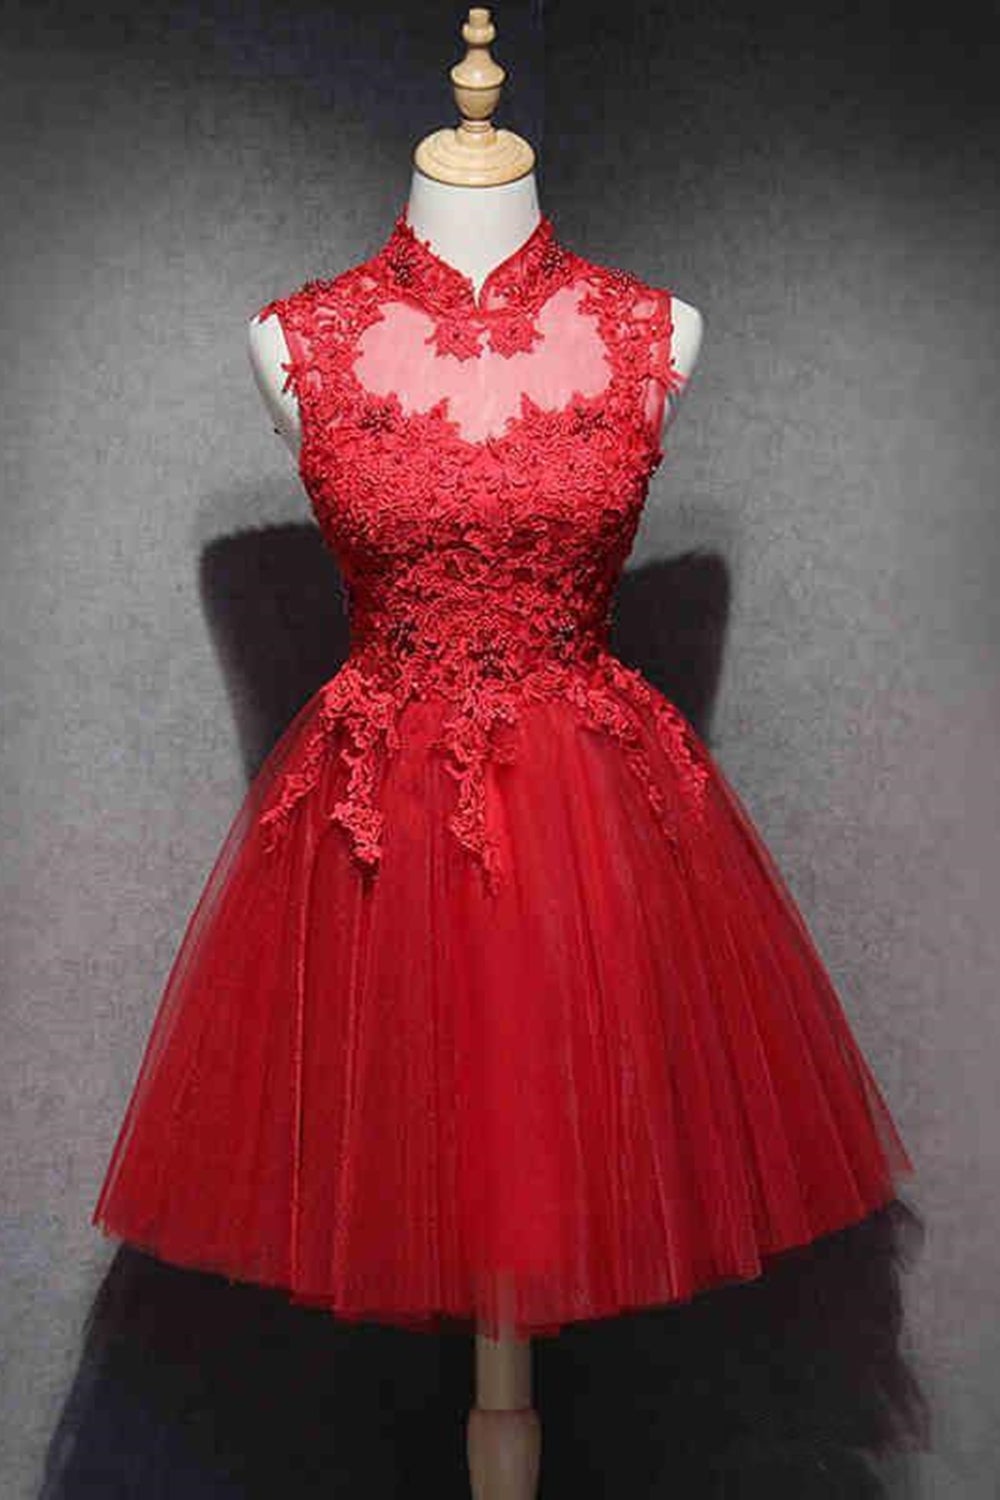 High Neck Red Lace Short Corset Prom Dress,Corset Homecoming Dresses,Red Corset Formal Graduation Evening Dress outfit, Black Prom Dress